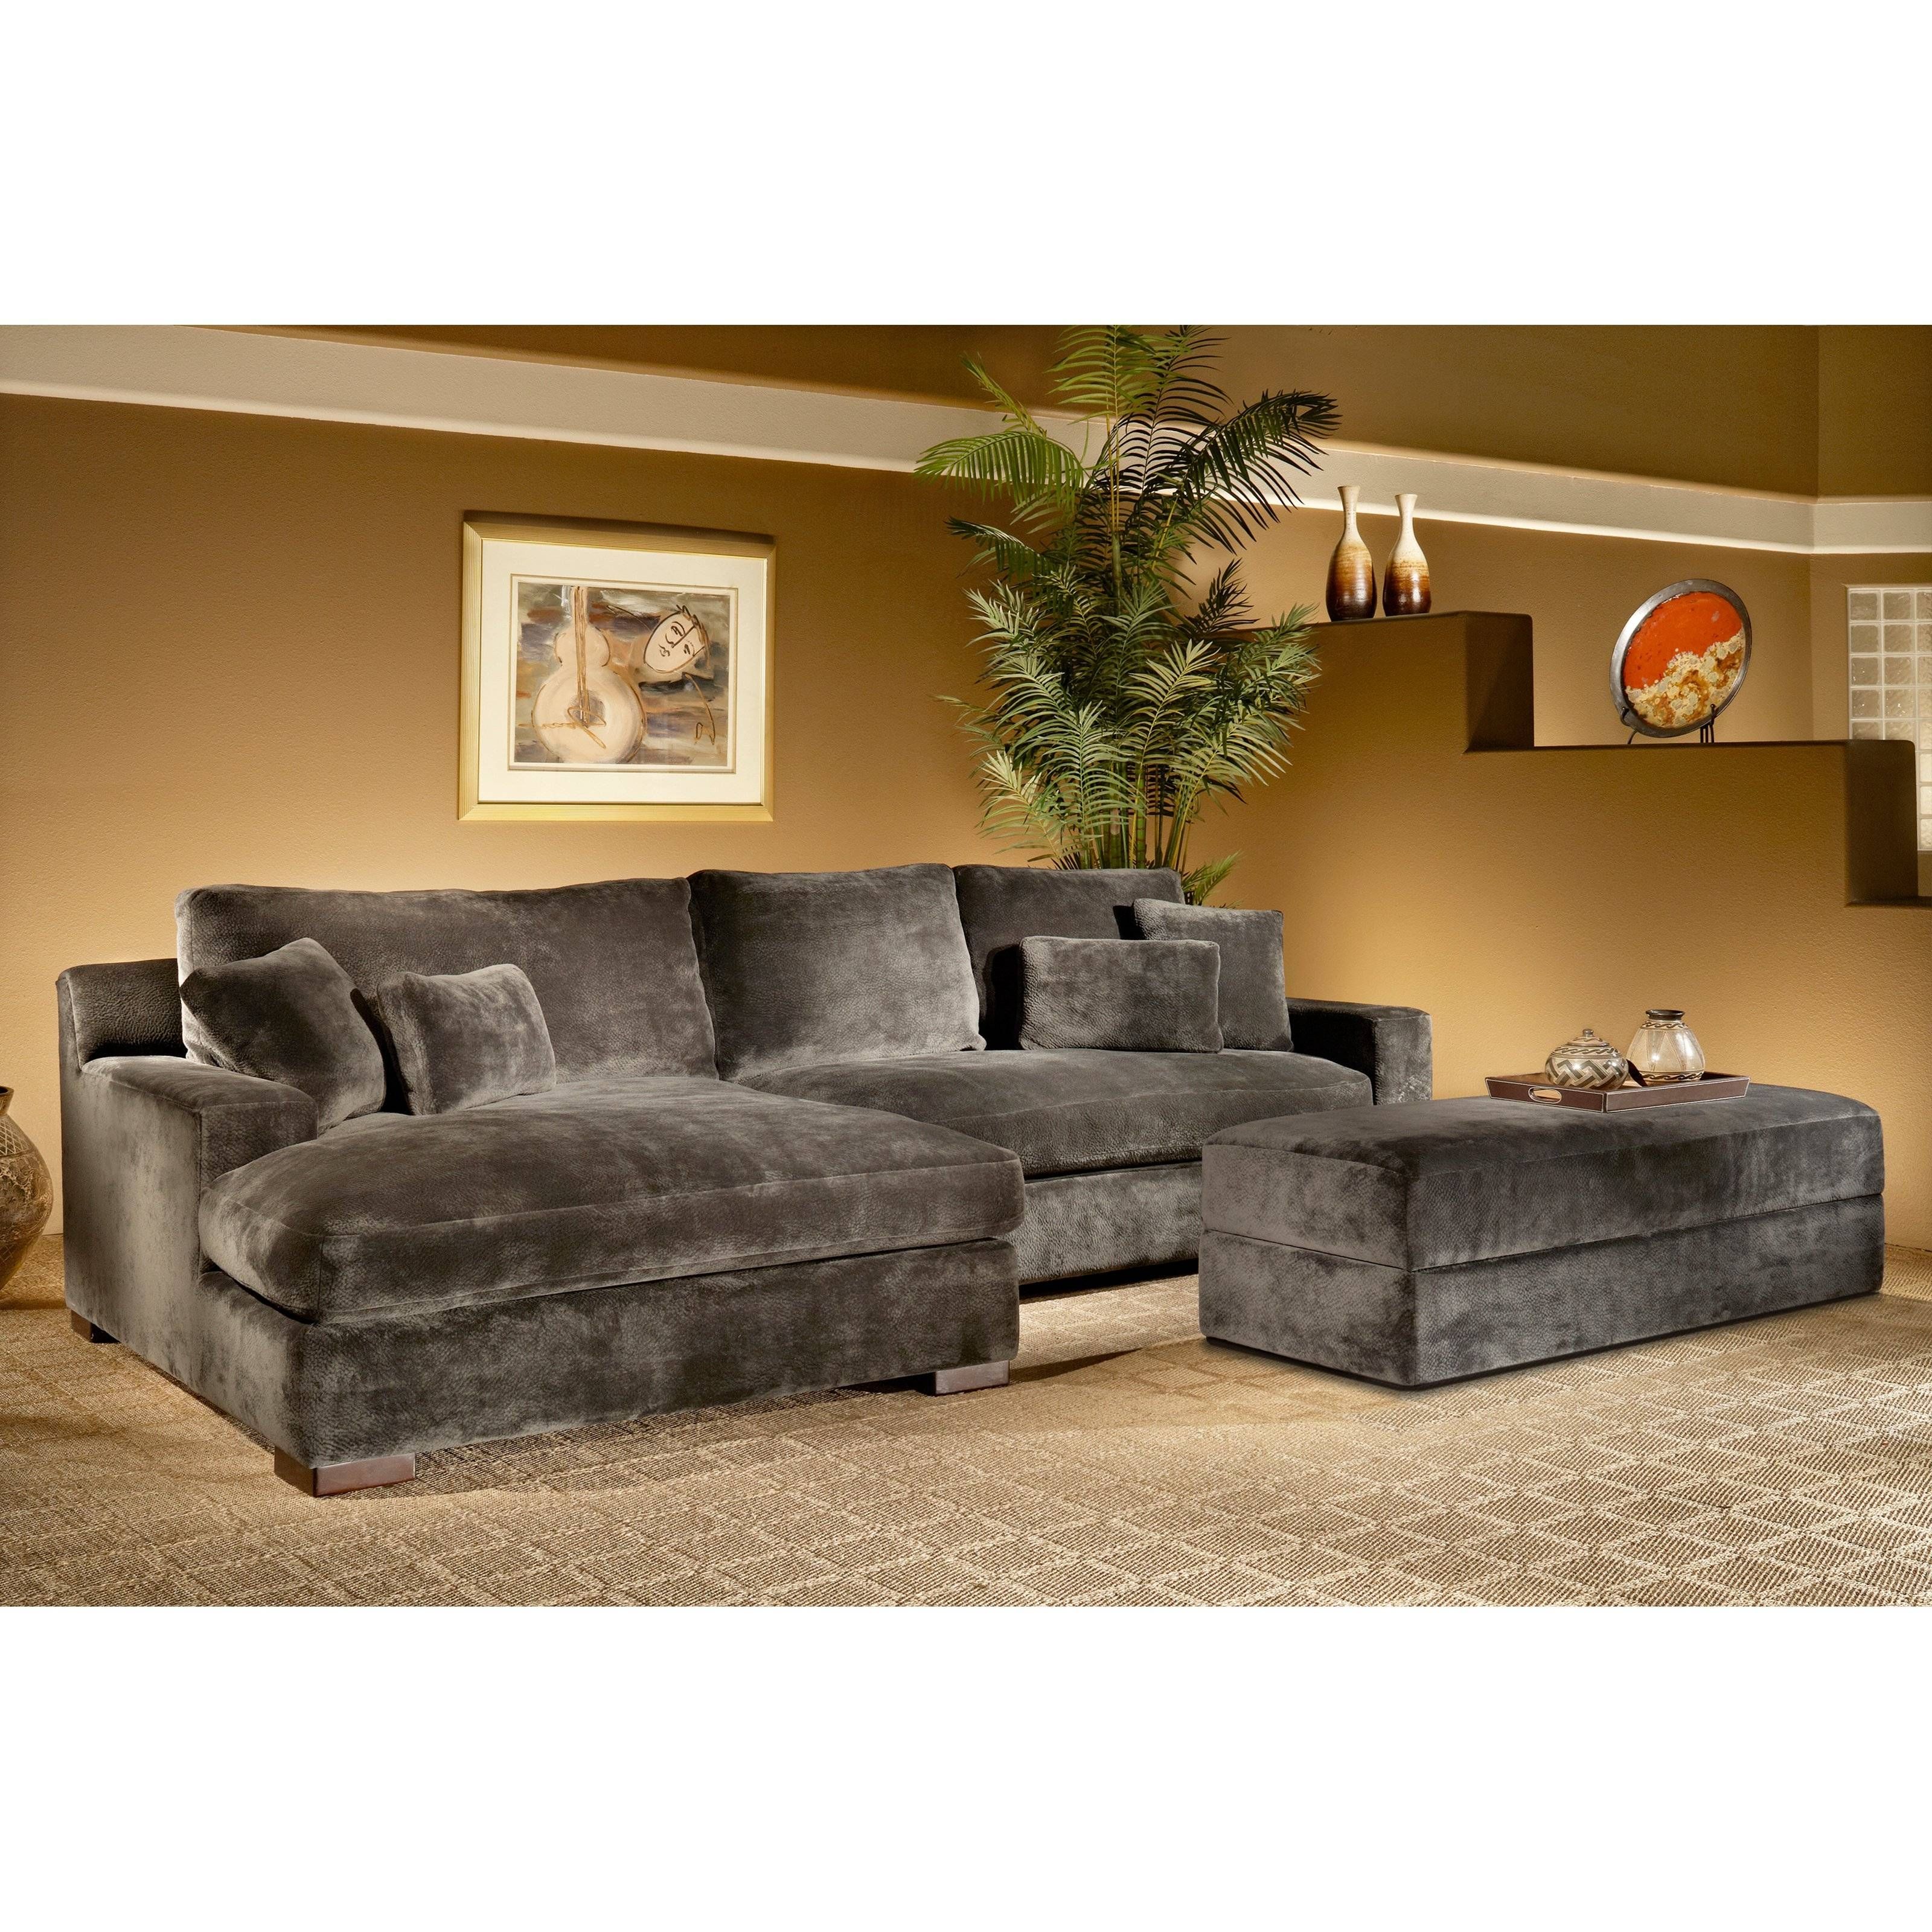 Fairmont Designs Doris 2 Piece Sectional Sofa With Storage Ottoman With Sofa With Chaise And Ottoman (View 21 of 30)